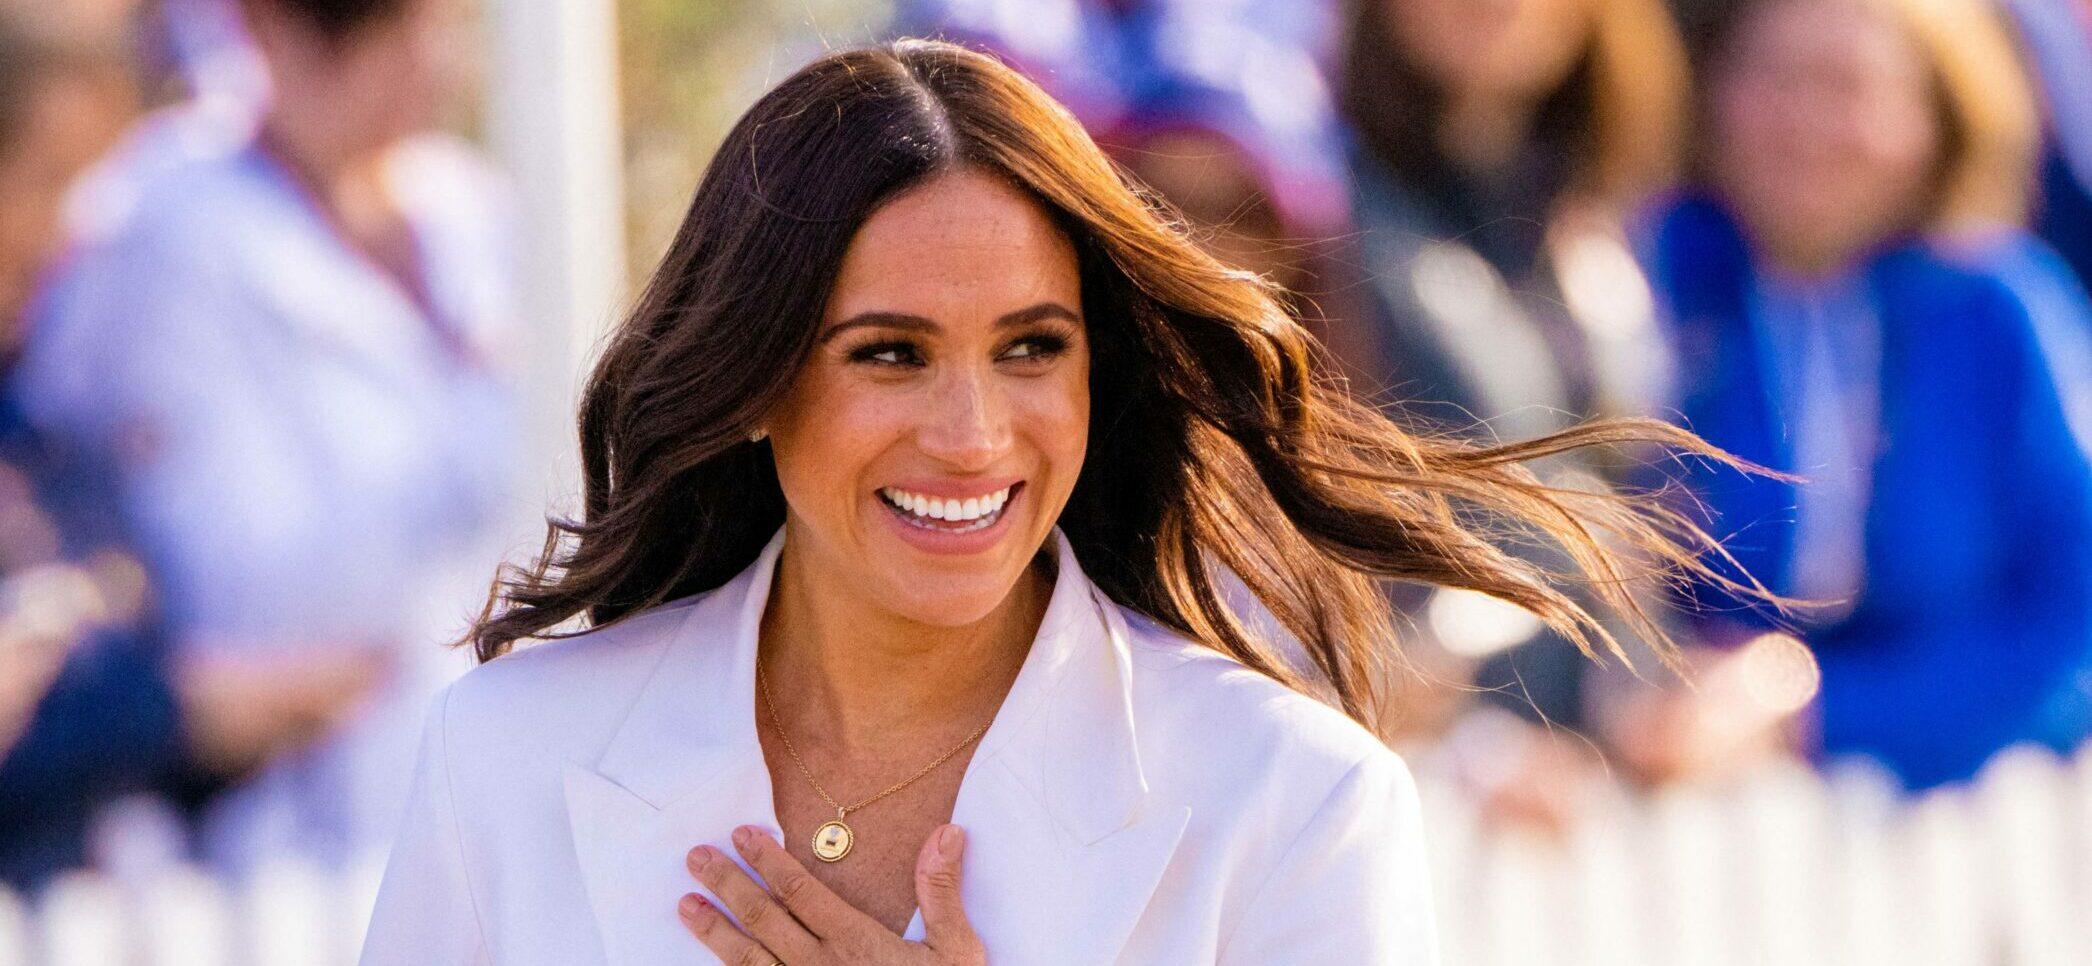 Meghan Markle Will Not Star In ‘Suits’ Spin-off Despite ‘Perfect Role’